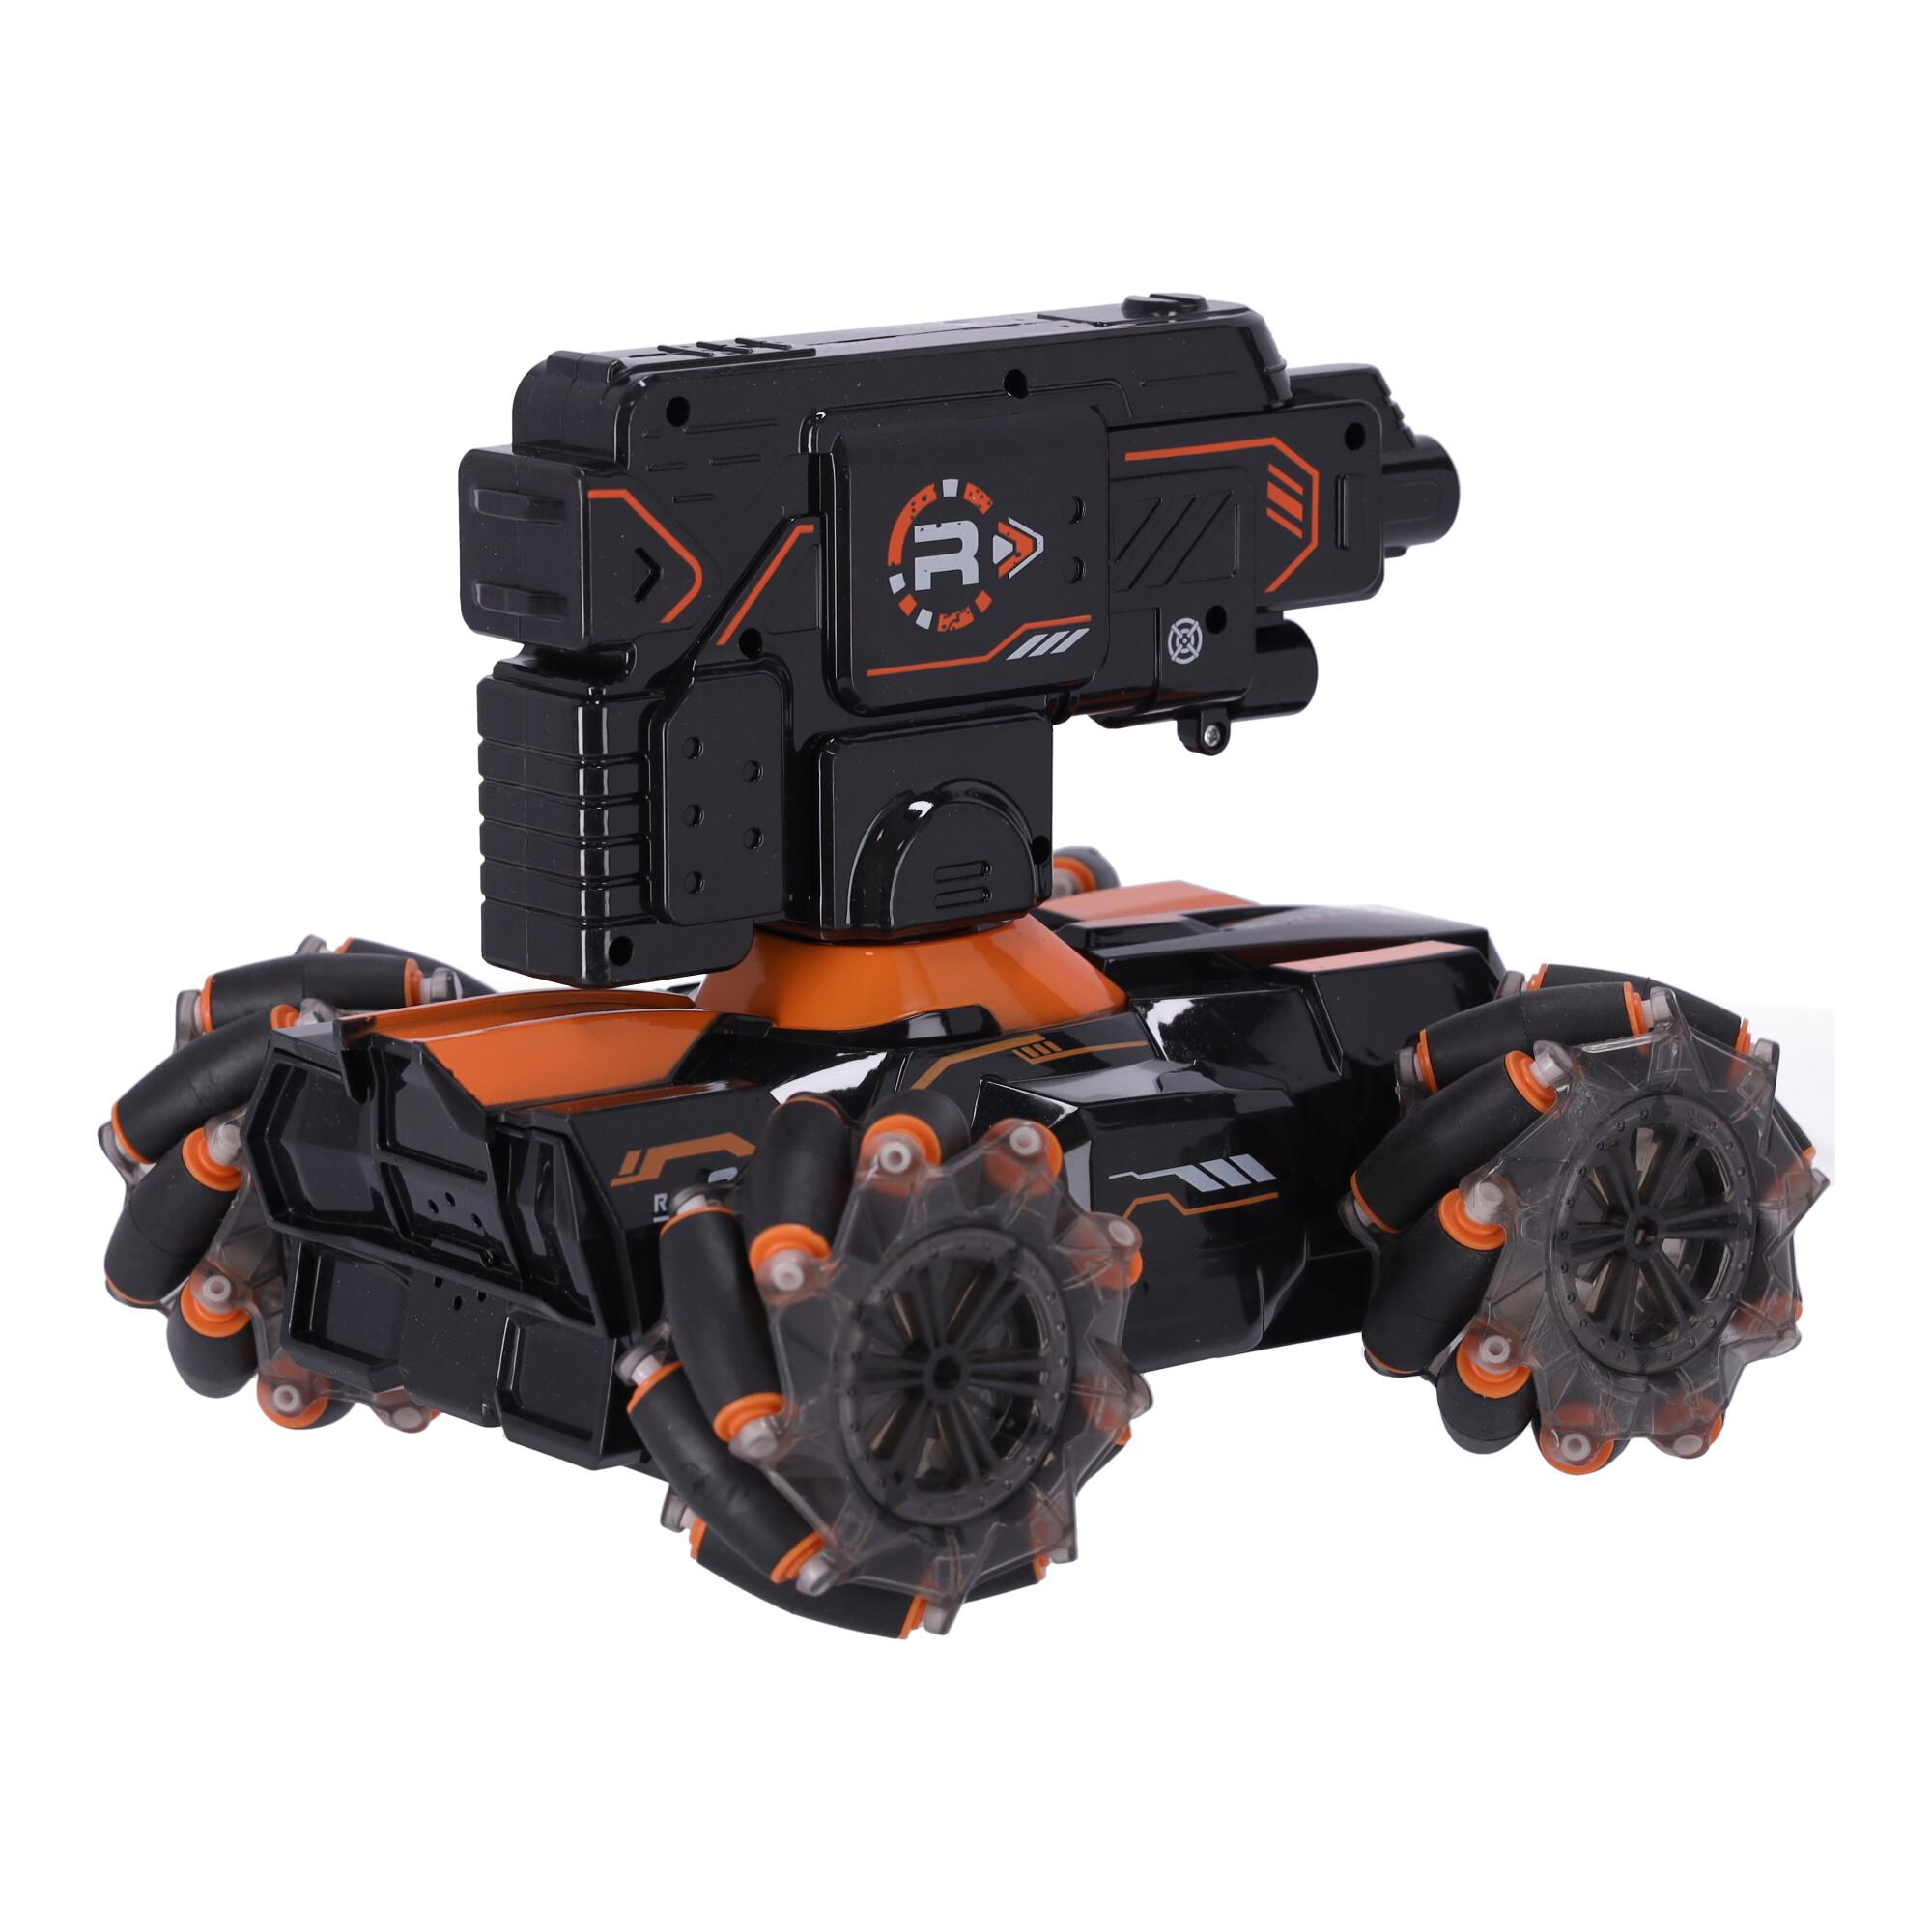 Remote controlled car with shooting water balls UKC029 - orange